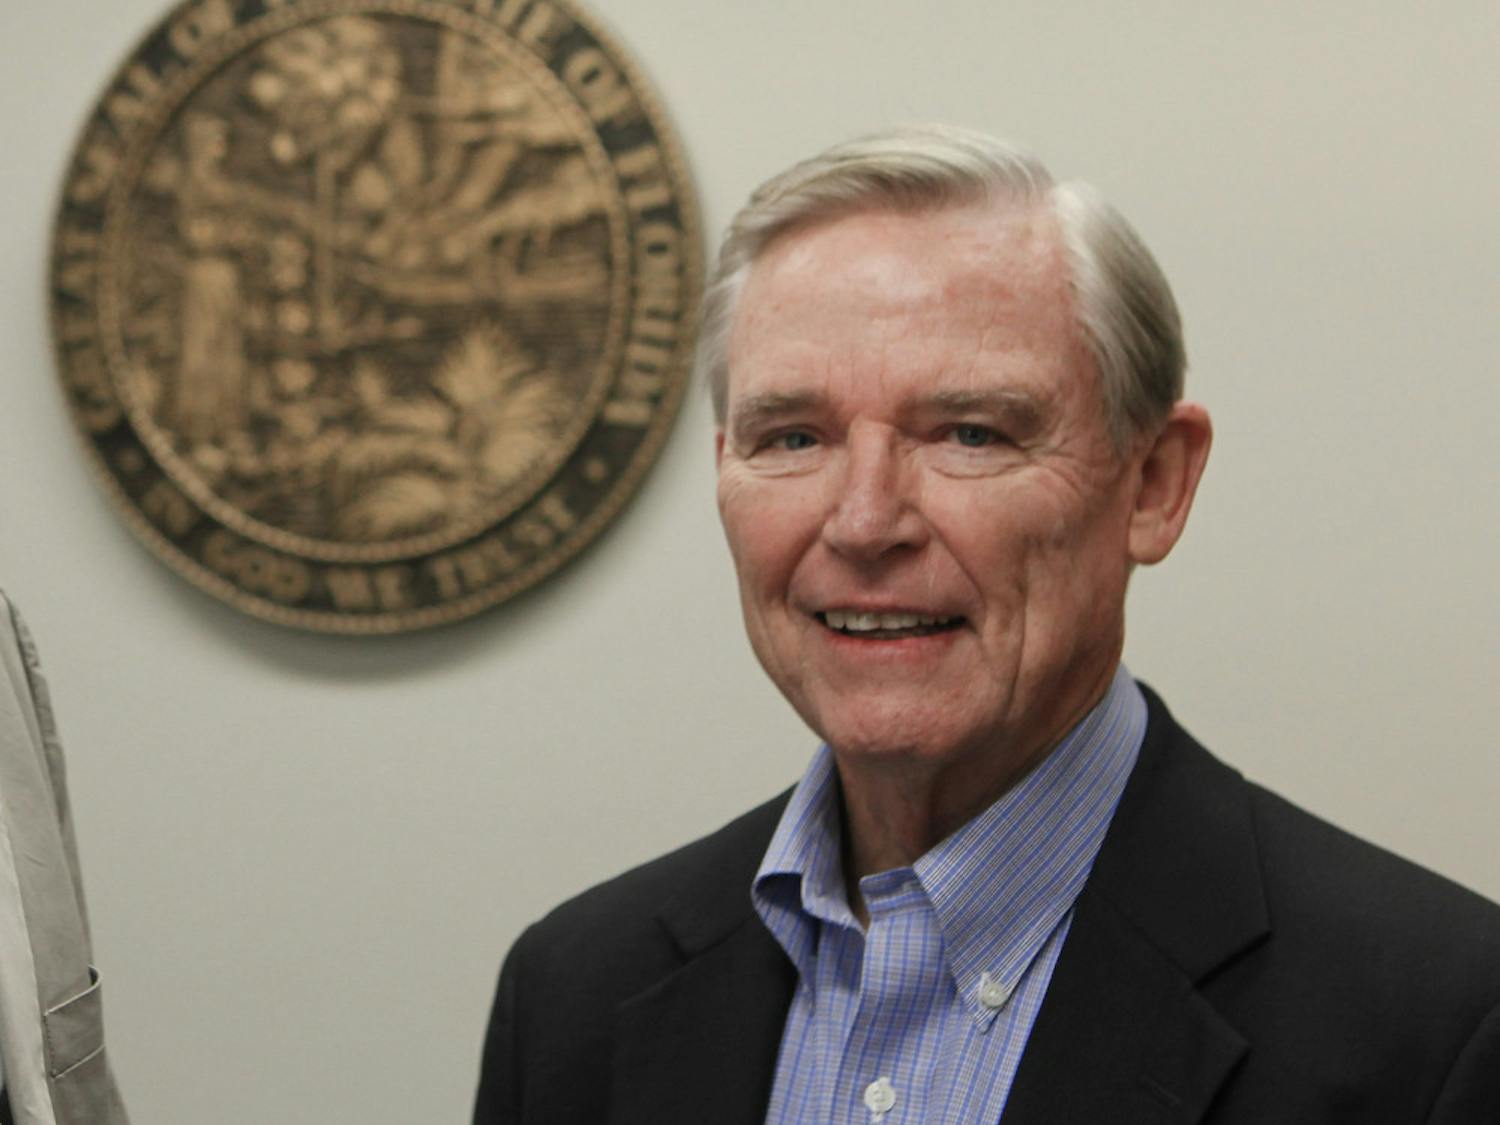 David Colburn, died on Sep. 18, 2019. Colburn served as the director served as the chair for the Department of History, vice provost and dean of the International Center, and UF’s provost and senior vice president in his nearly 50-year career.